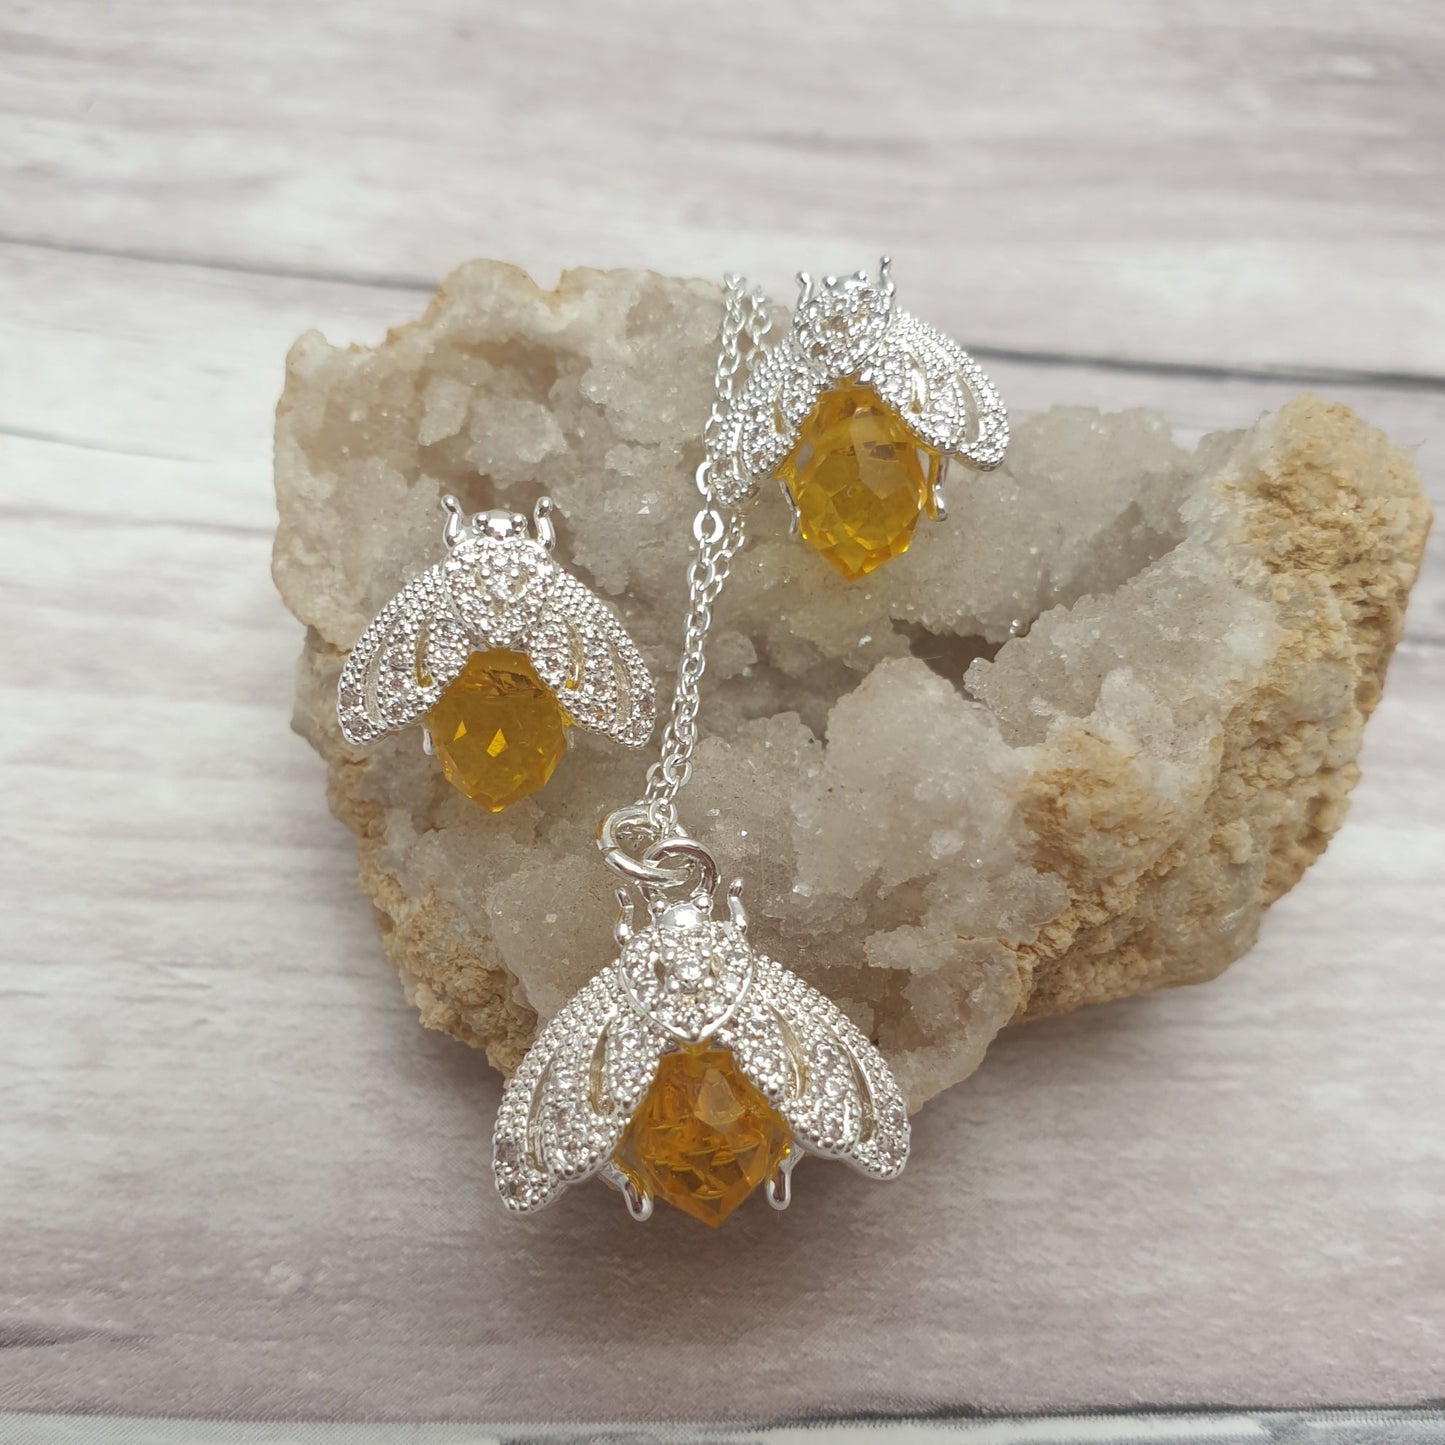 Matching yellow bee crystal necklace and earrings.